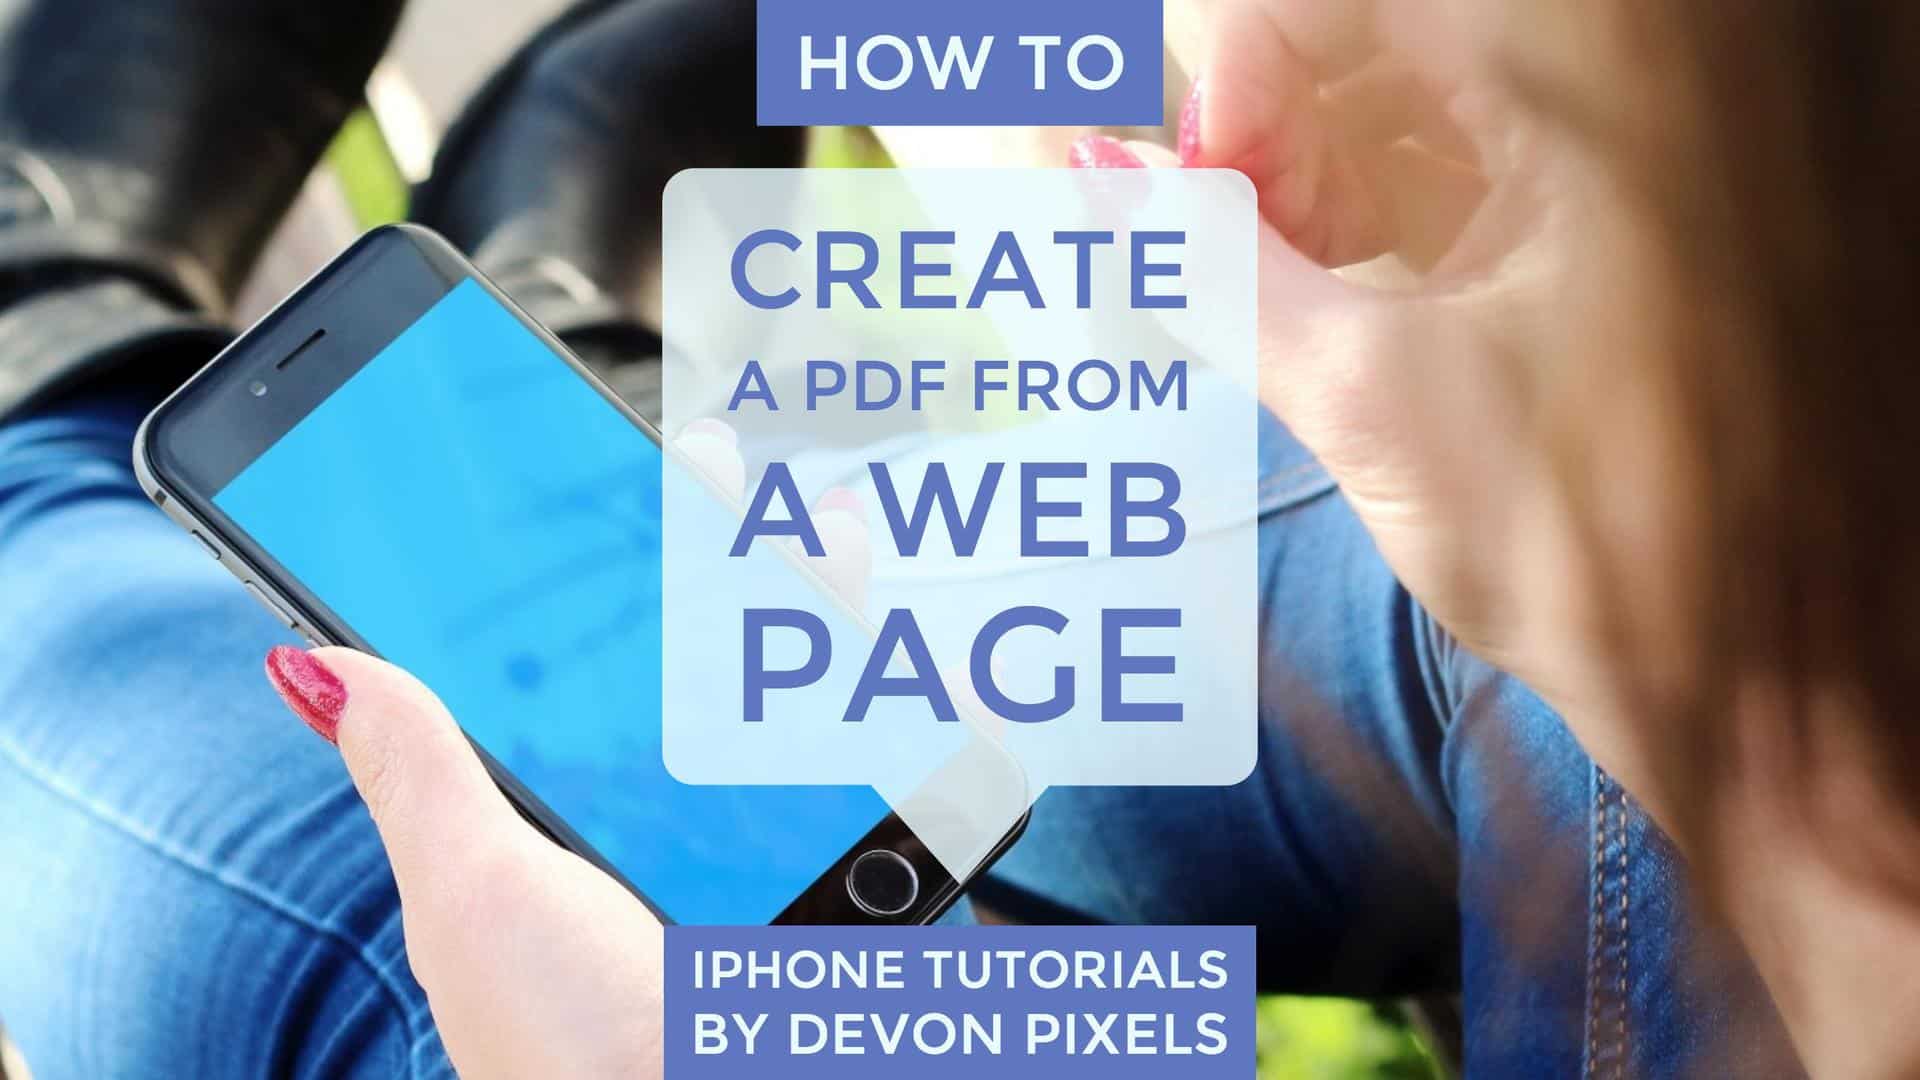 How to Create a PDF from a Web Page on an iPhone - iPhone Tutorial